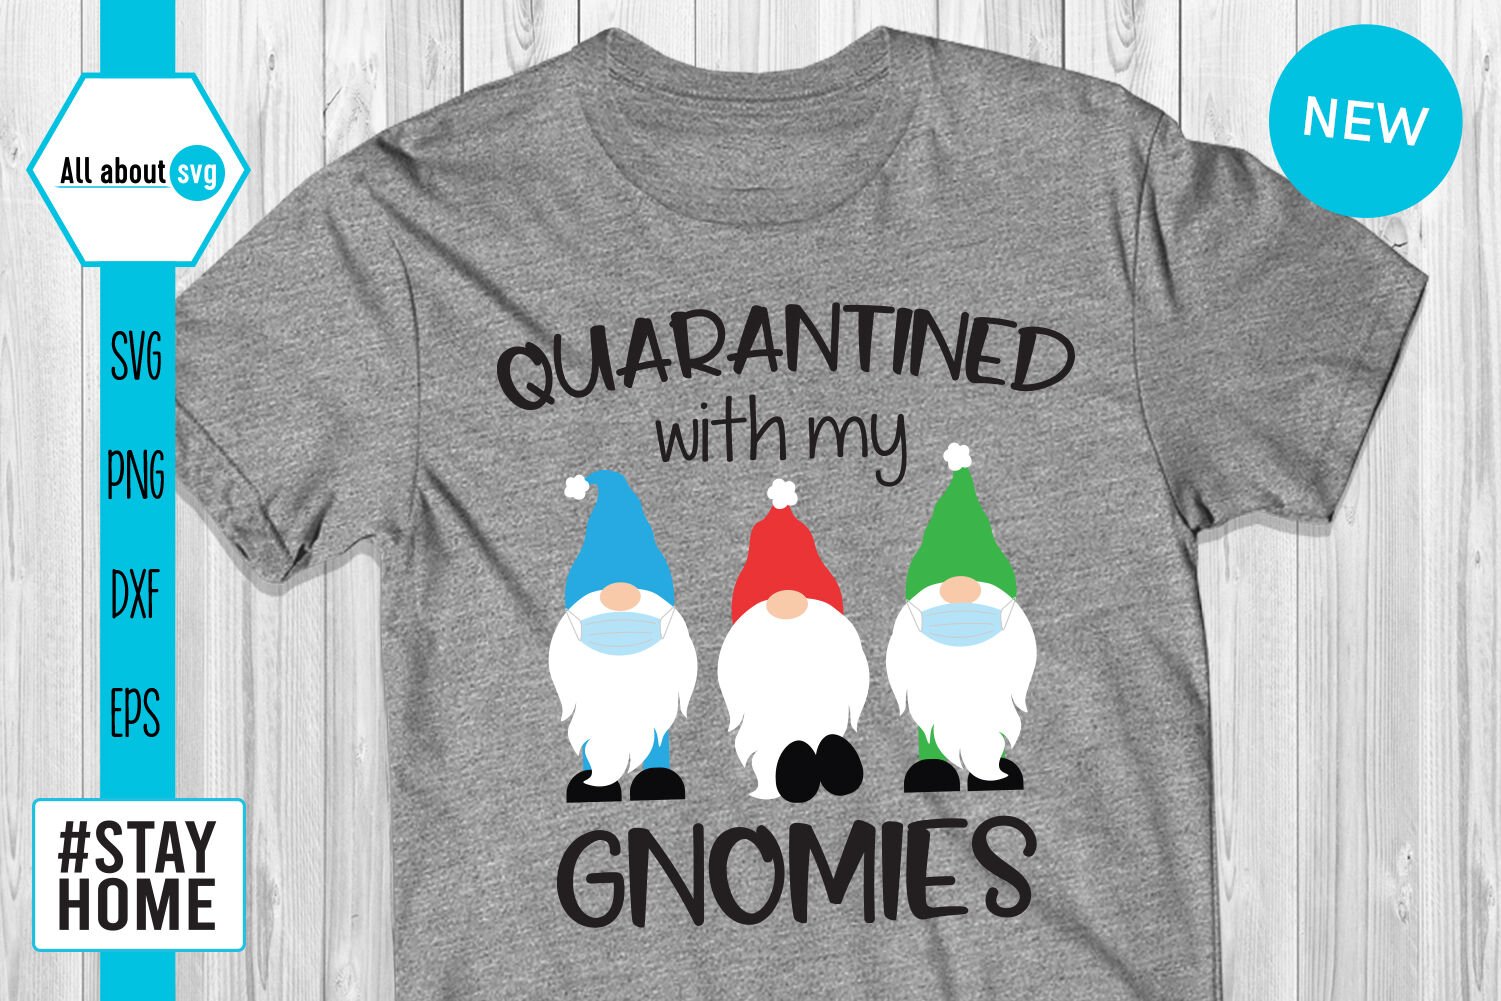 Quarantined With My Gnomies Svg By All About Svg Thehungryjpeg Com